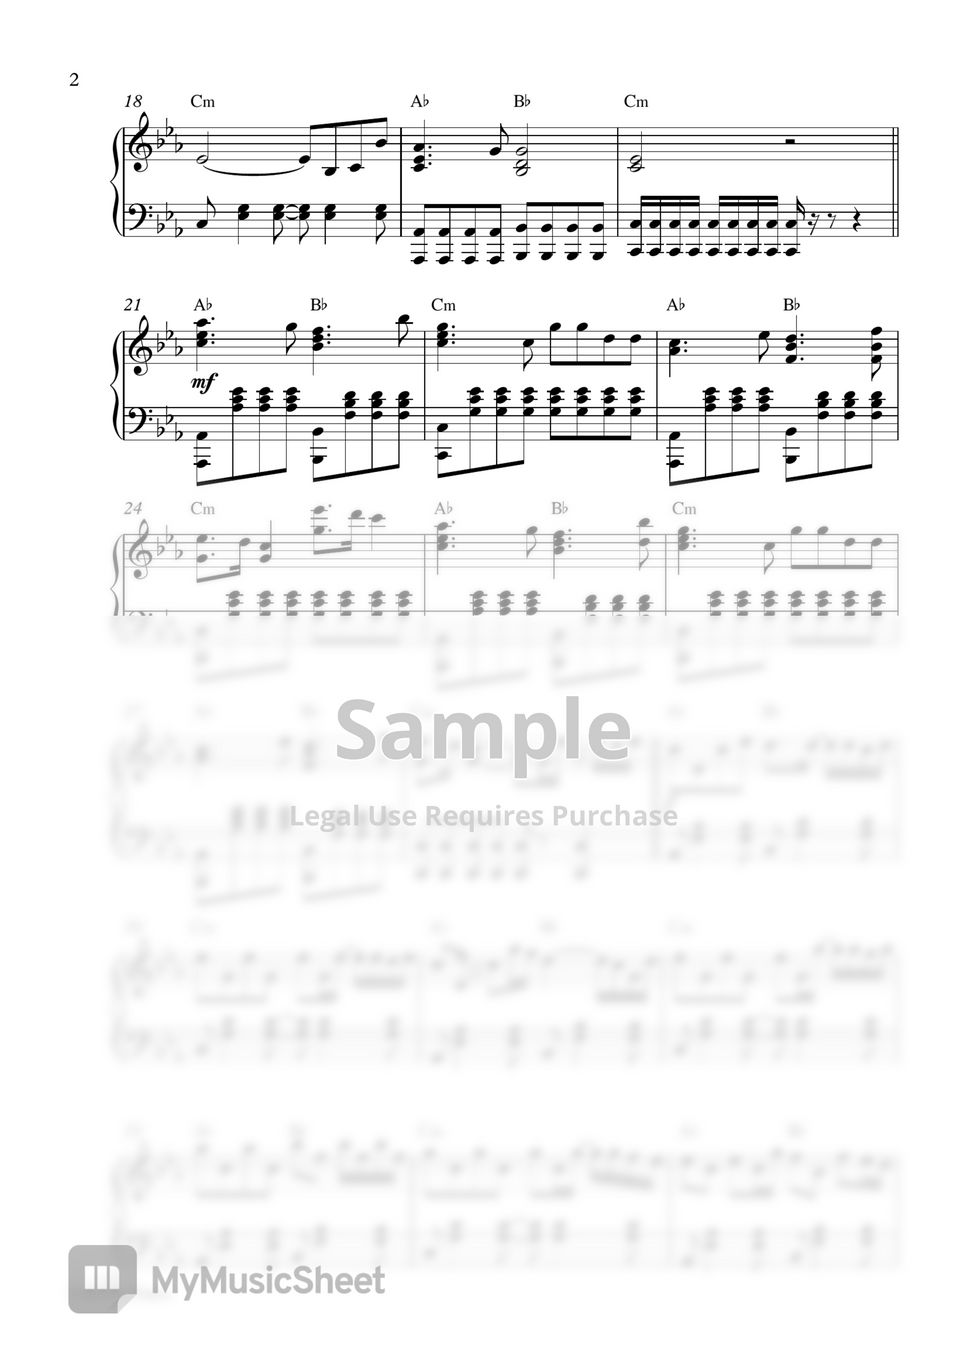 Alan Walker X Coldplay - Hymn For The Weekend (Piano Sheet) by Pianella Piano